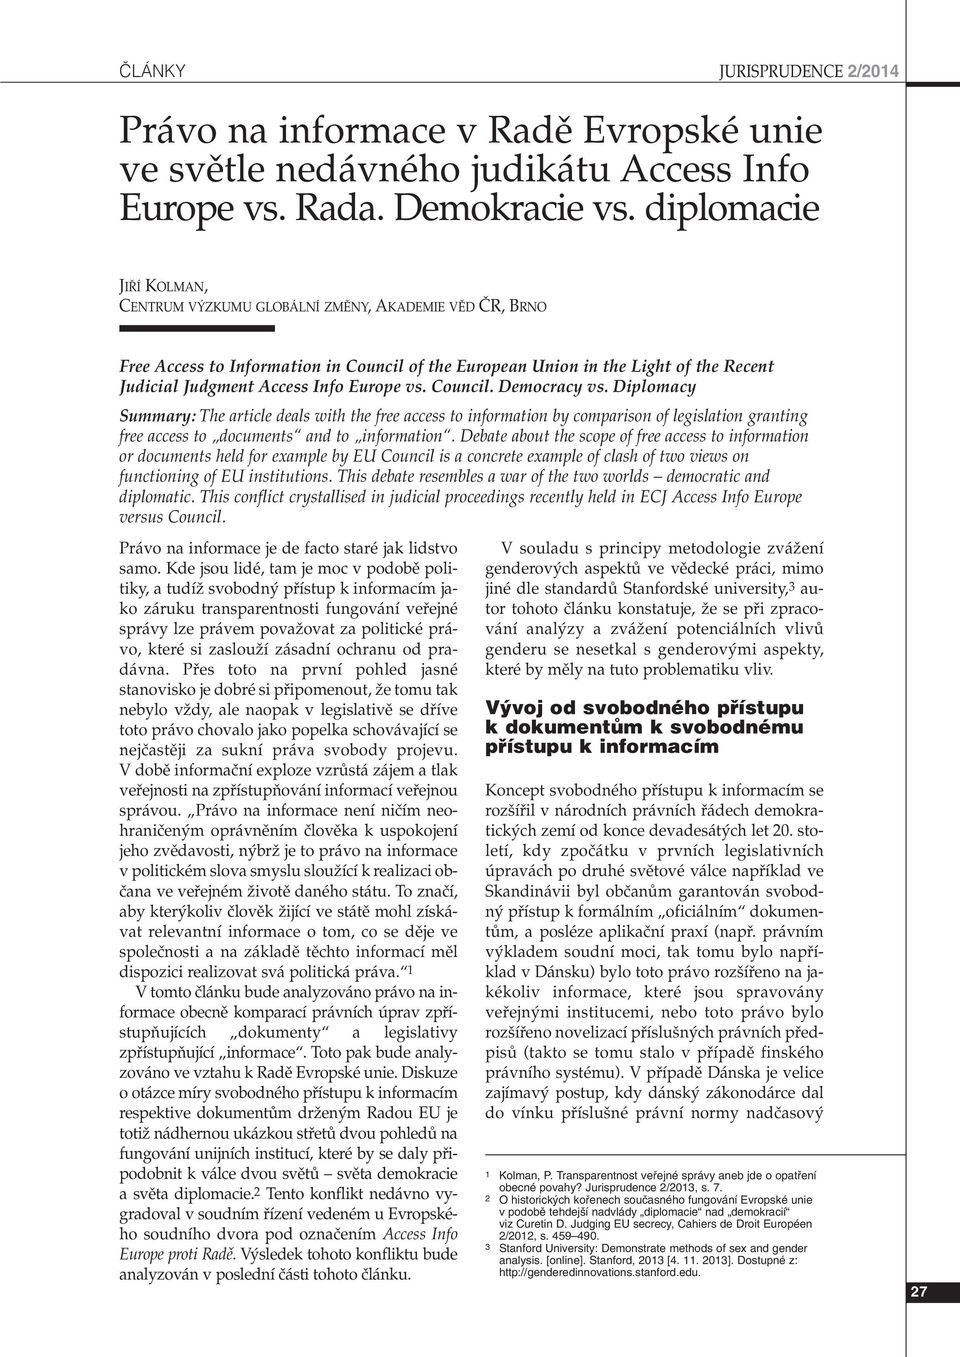 Europe vs. Council. Democracy vs. Diplomacy Summary: The article deals with the free access to information by comparison of legislation granting free access to documents and to information.